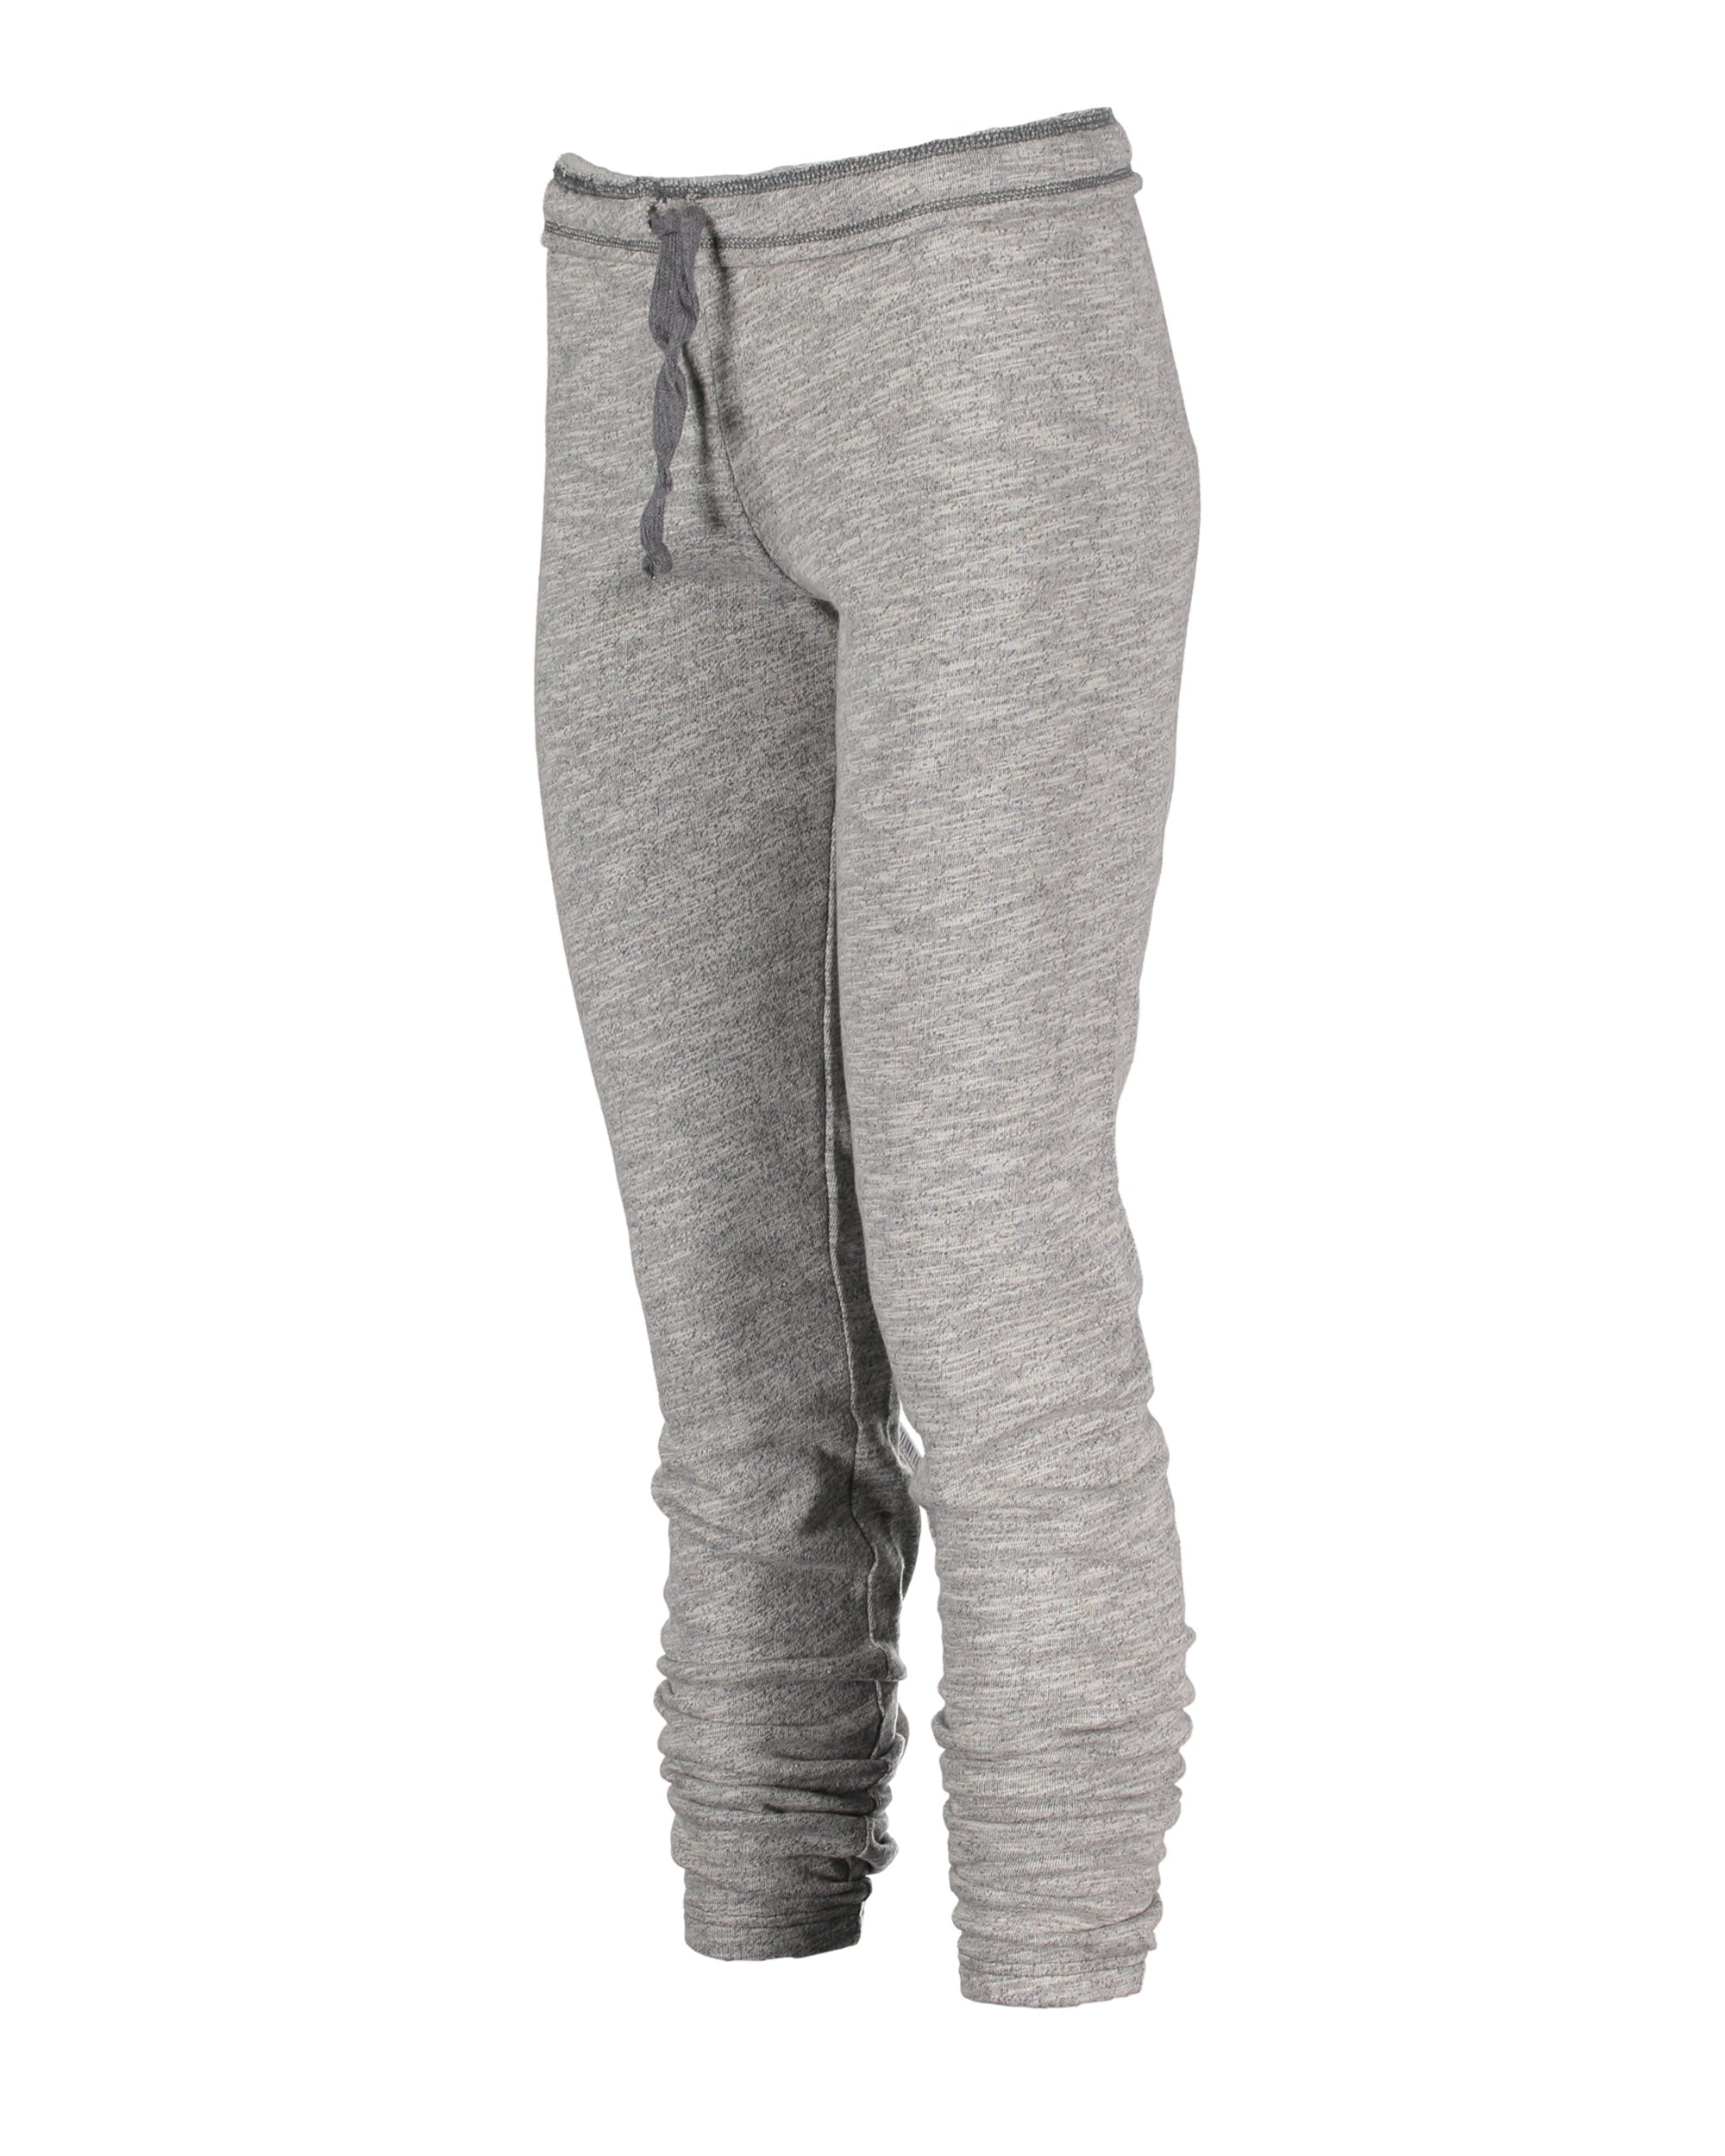 The Marled French Terry Jogger